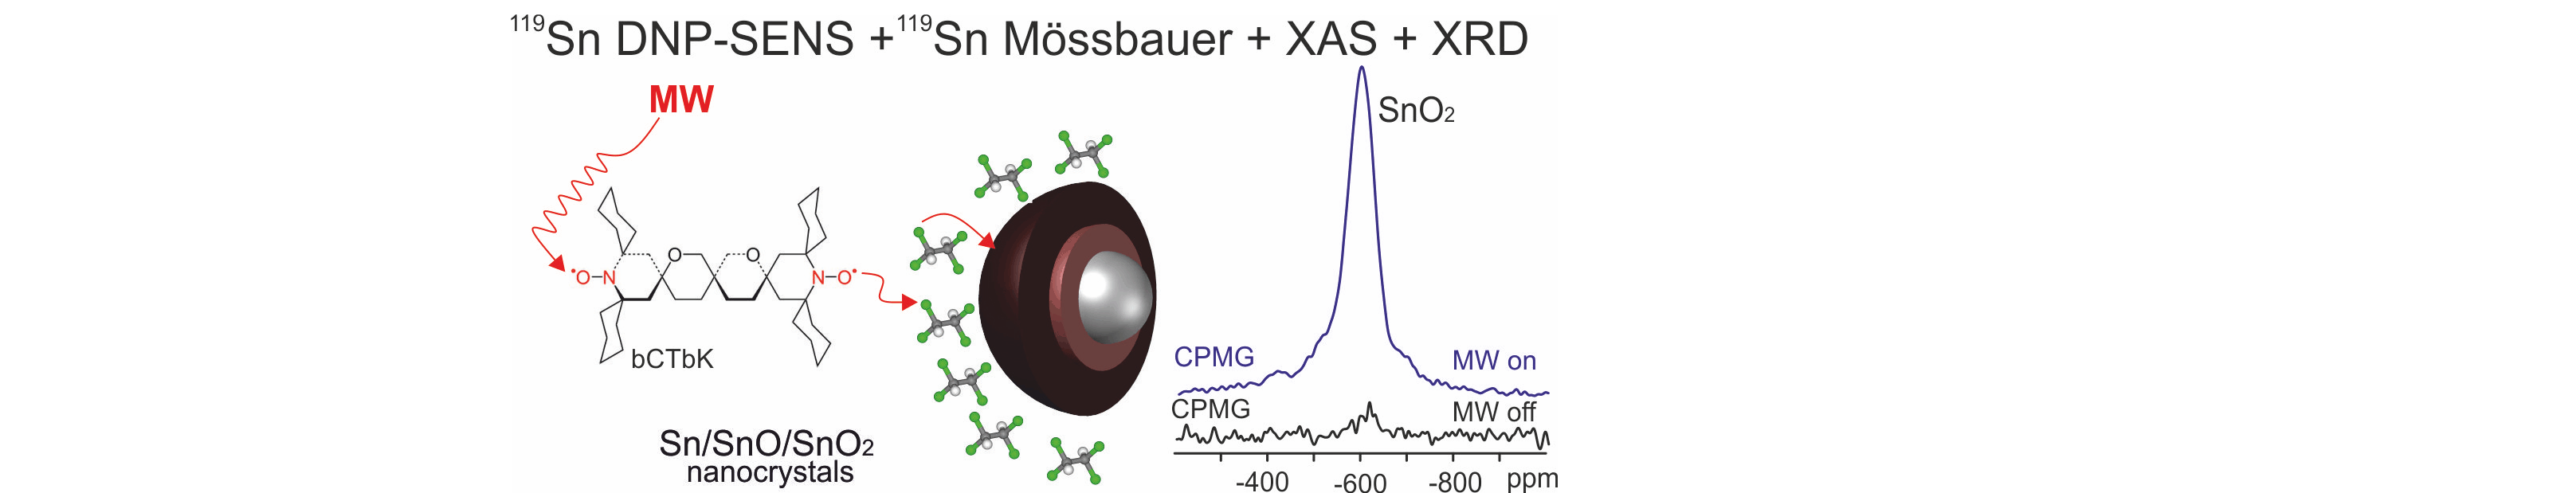 Unraveling the Core-Shell Structure of Ligand-Capped Sn/SnOx Nanoparticles by Surface Enhanced Nuclear Magnetic Resonance, Mössbauer and X-Ray Absorption Spectroscopies